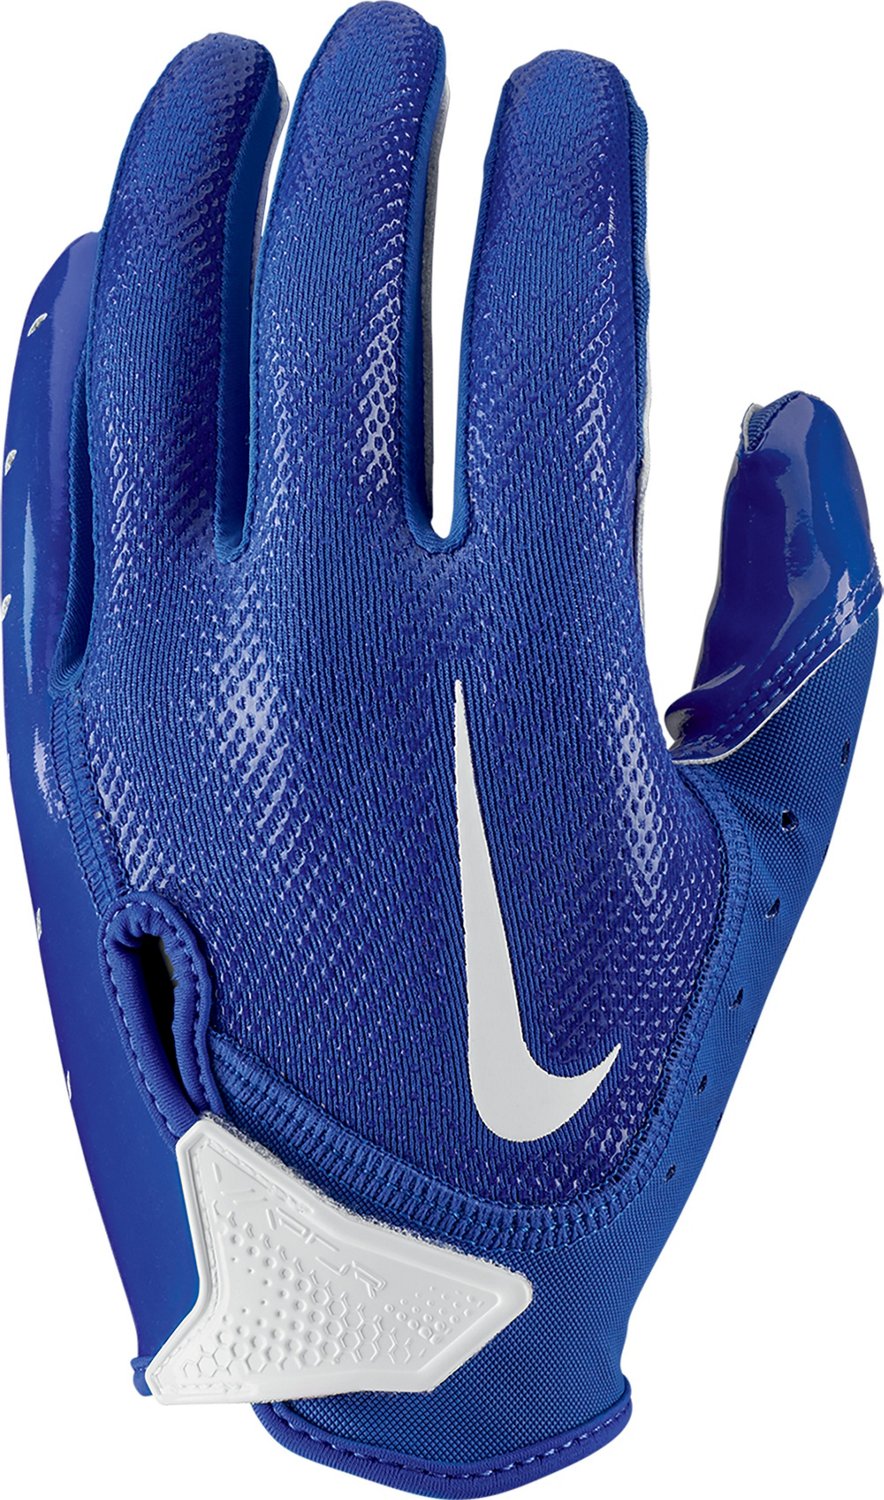 Nike Youth Vapor Jet 7.0 Football Gloves                                                                                         - view number 1 selected